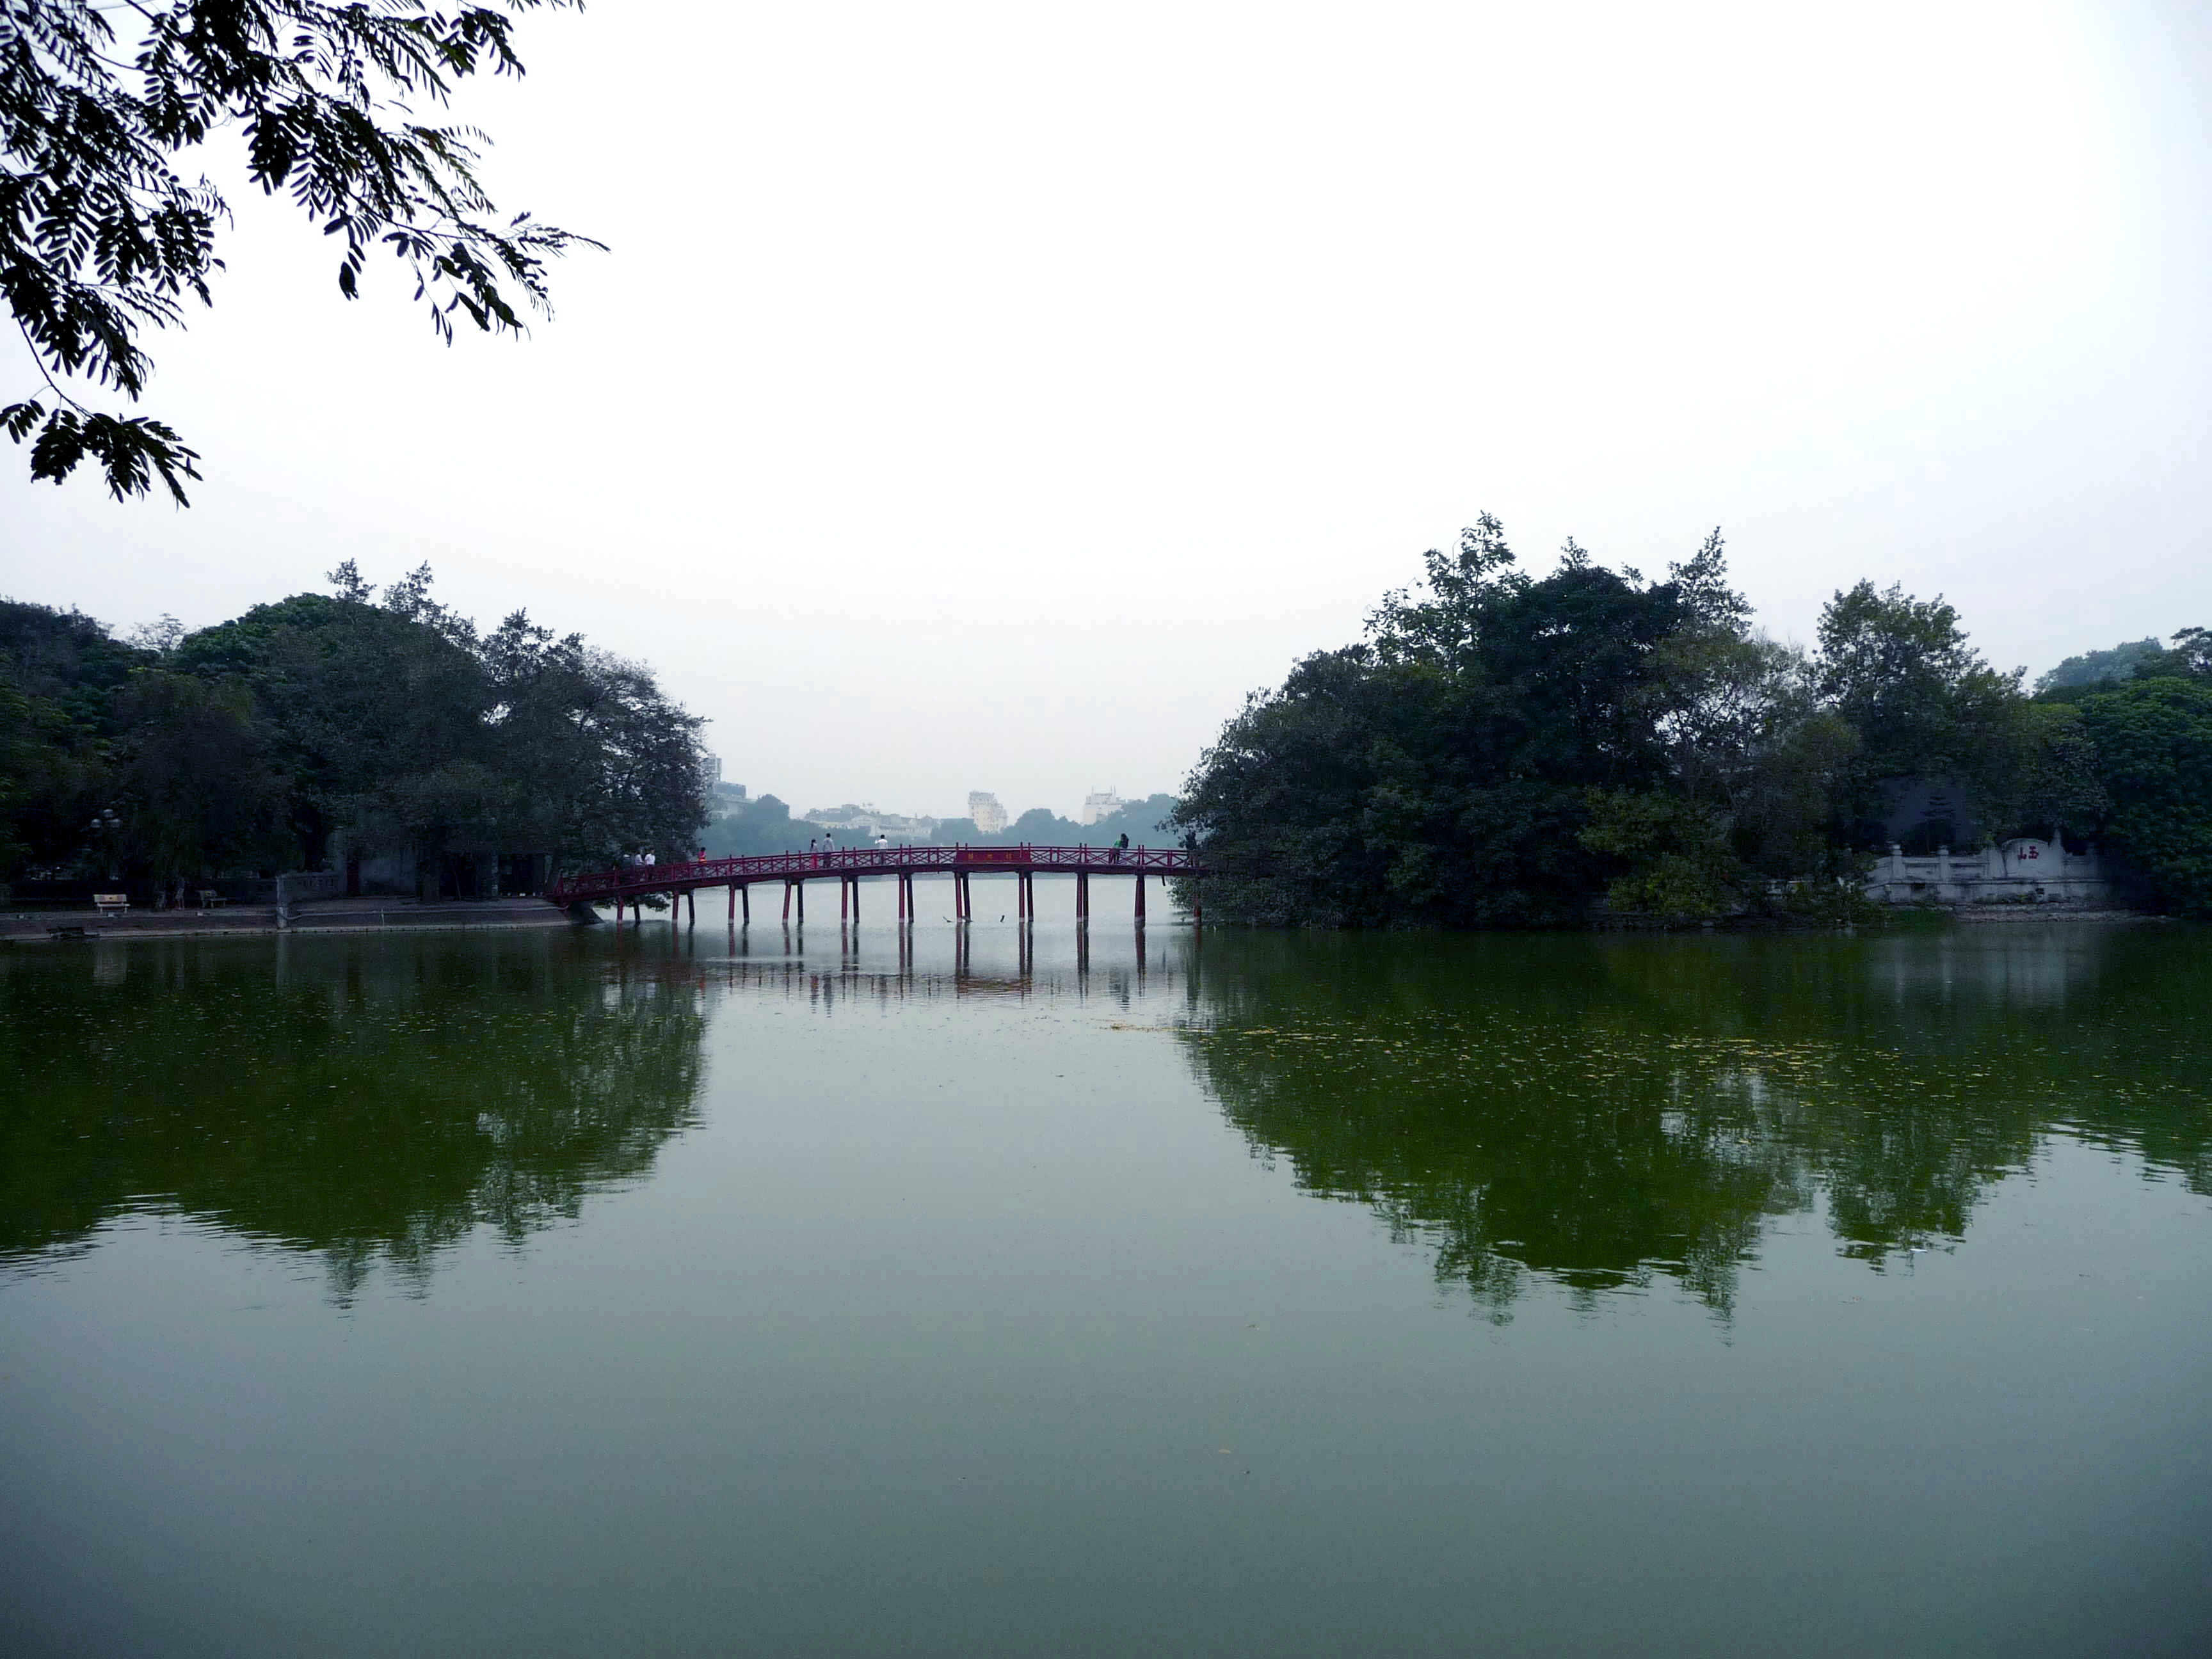 Nestled on the shores of the picturesque Hoan Kiem Lake, Ngoc Son Temple is a captivating landmark that adds to the charm of Hanoi's Old Quarter.